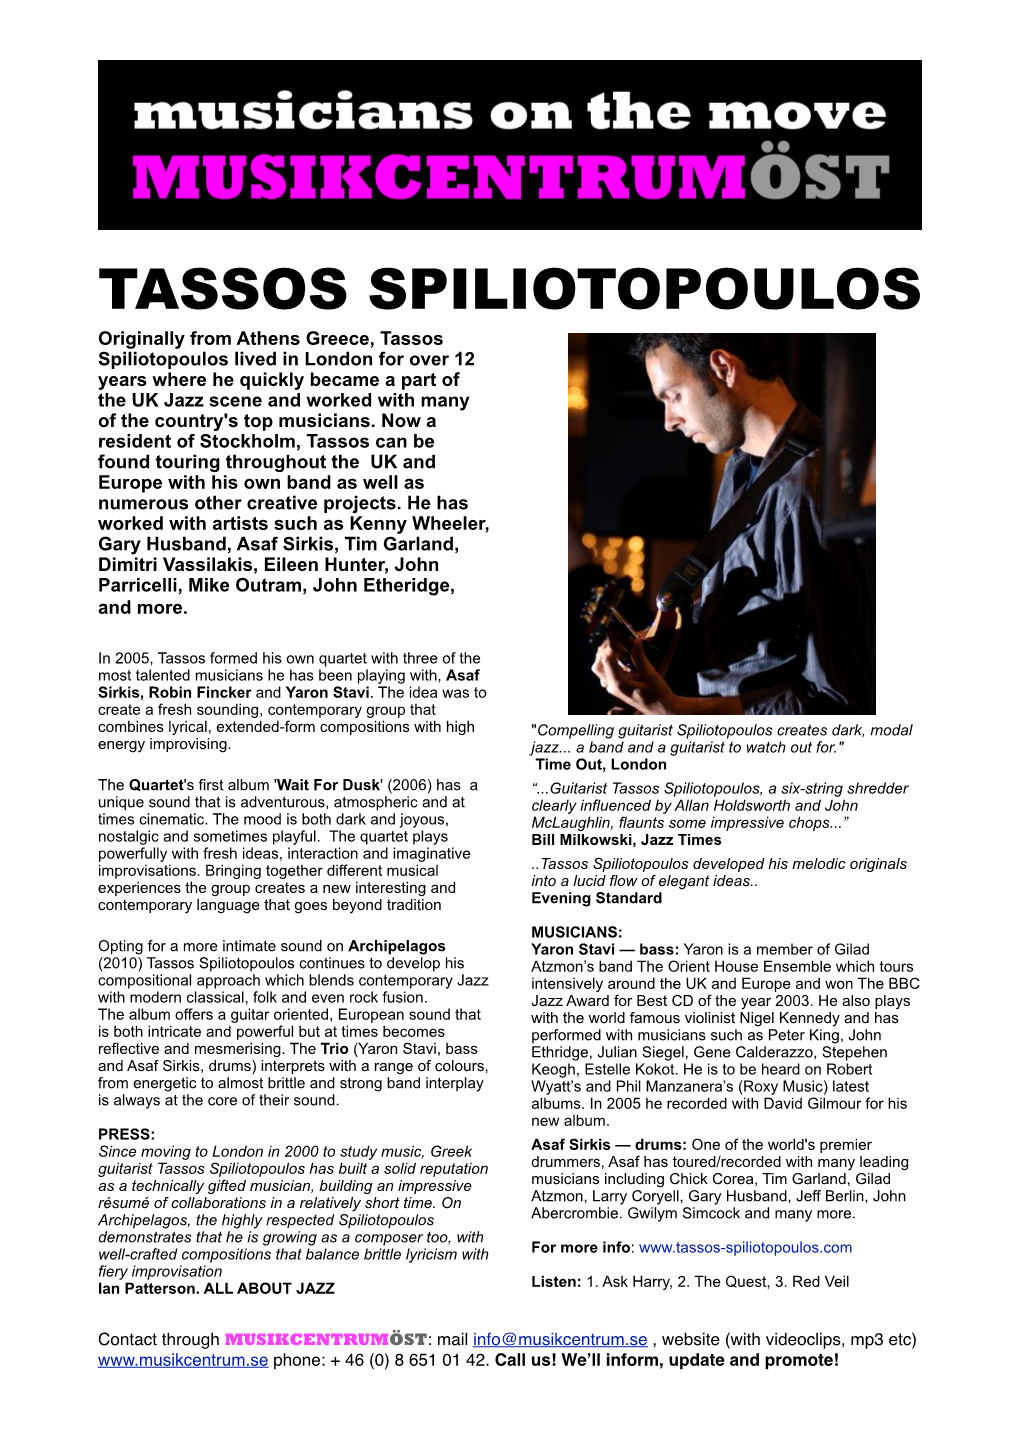 Tassos Spilitopoulos on the Move Mall